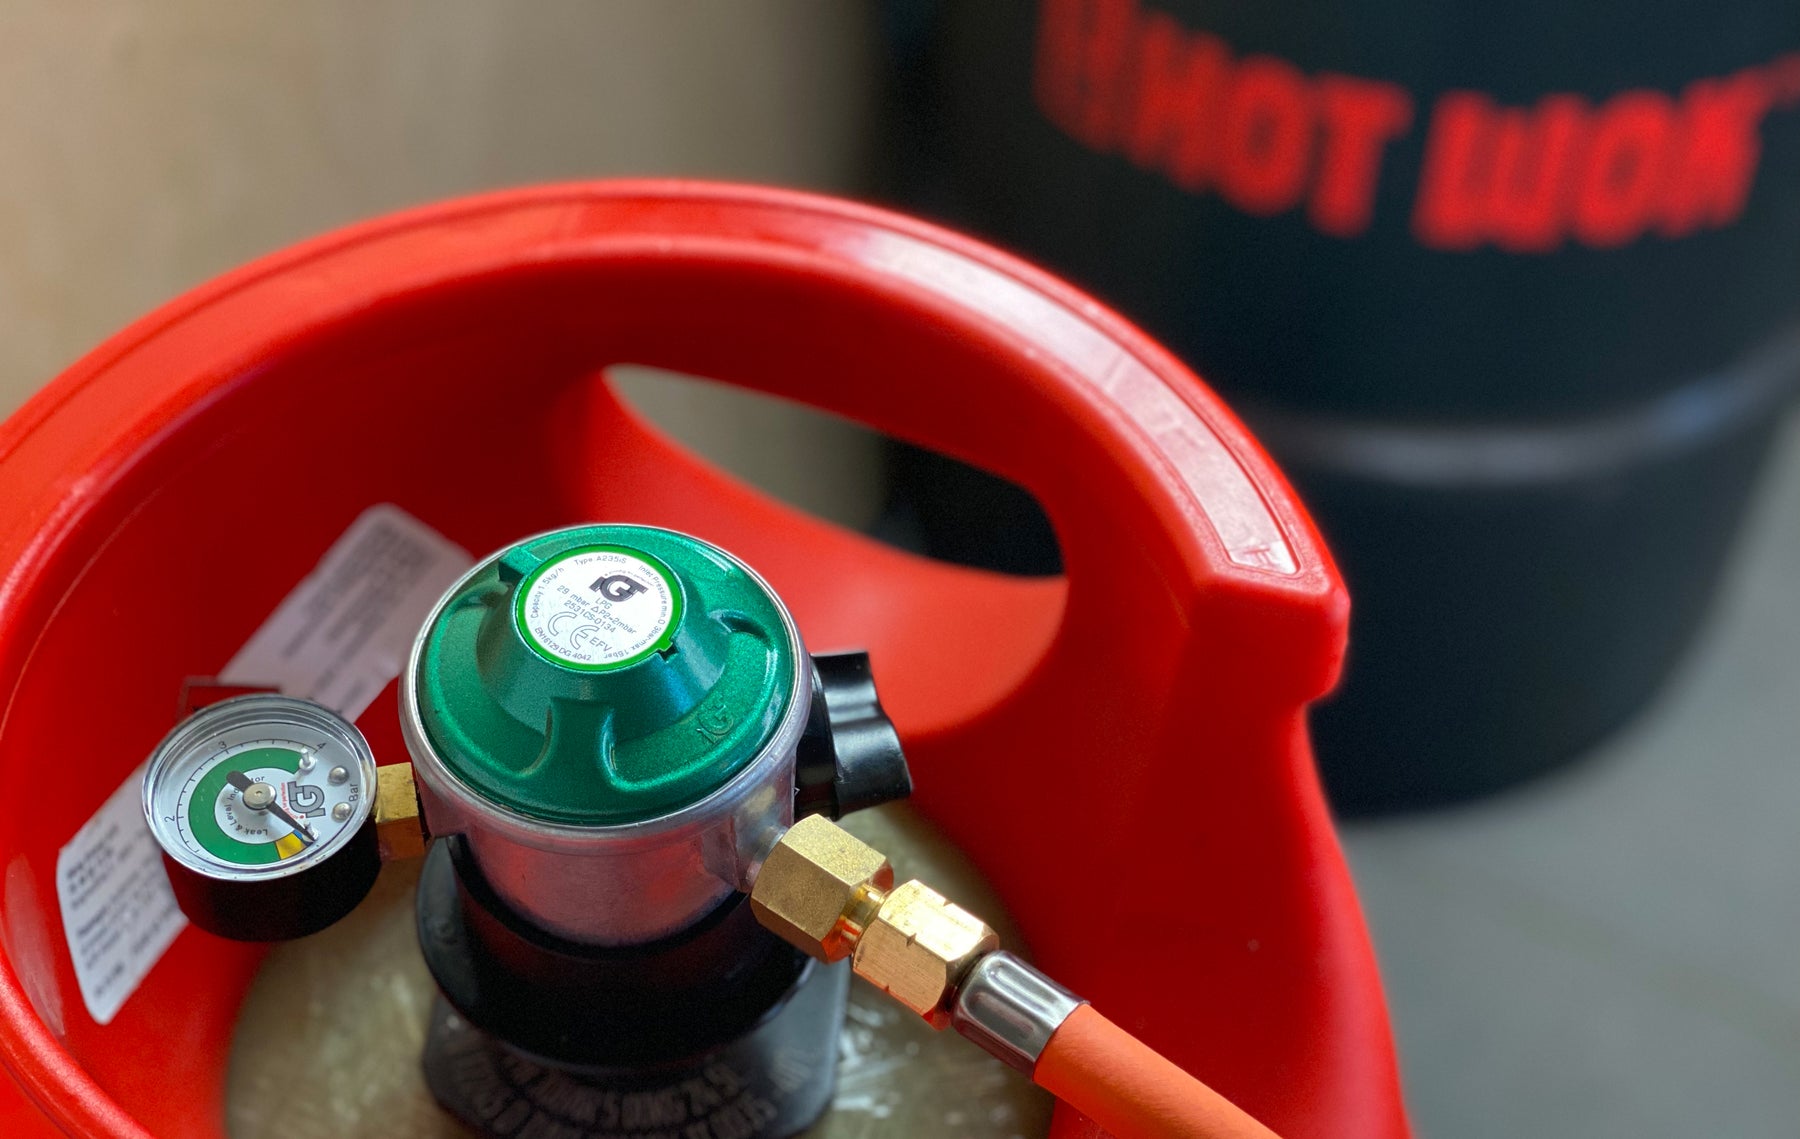 HOW TO: Mount a 29 mBar Gas regulator on a Gas cylinder